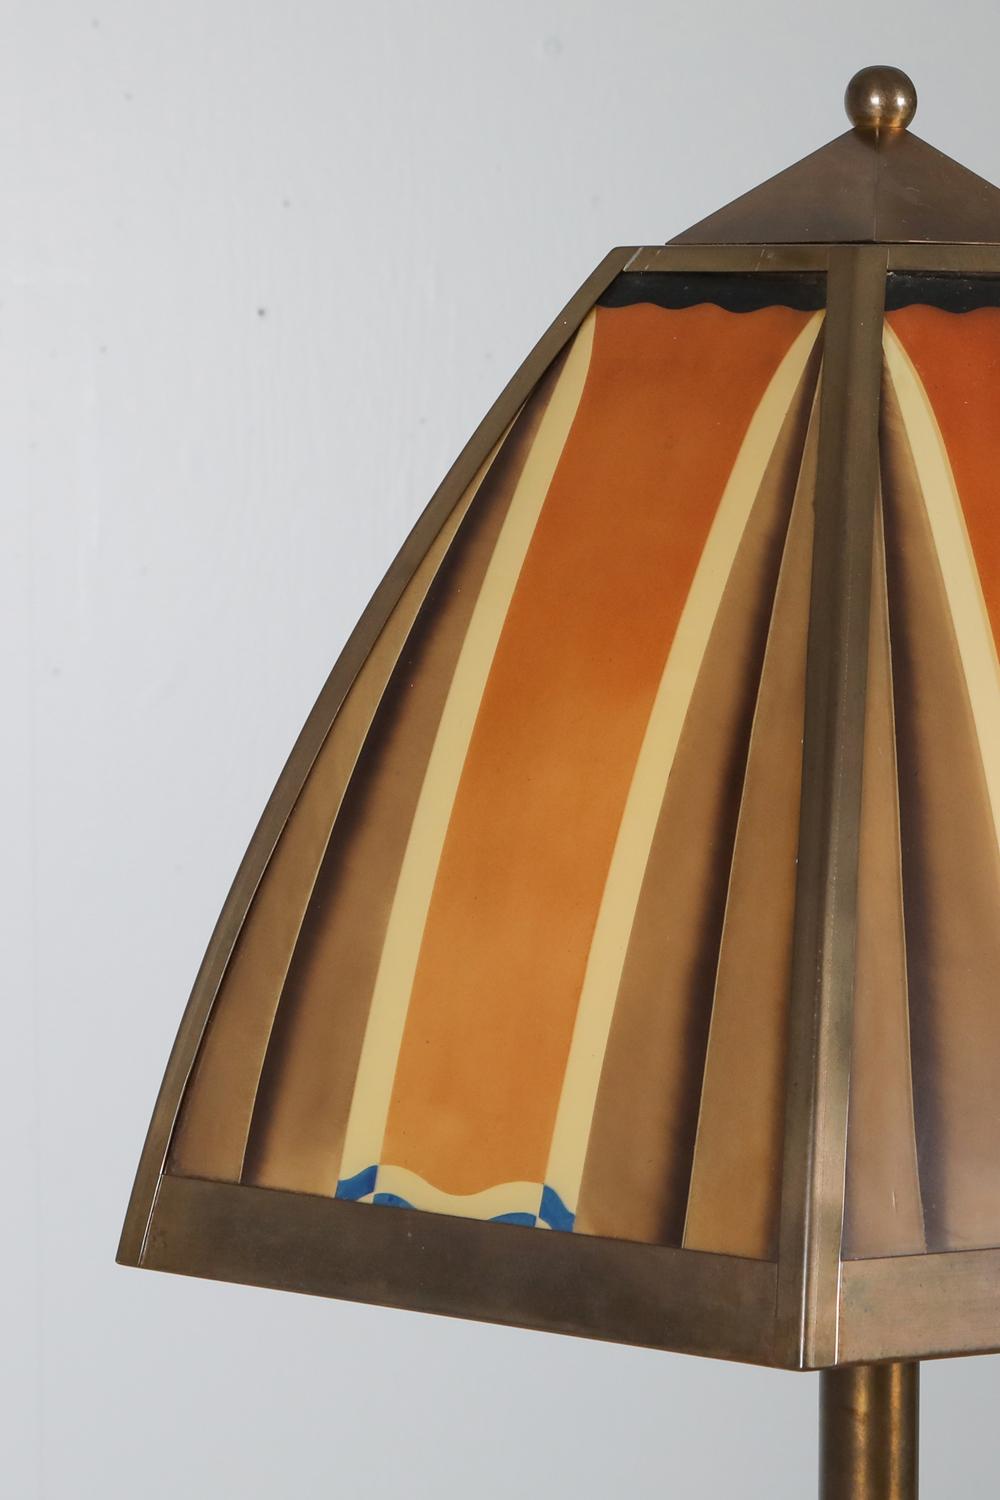 Bronze and Colored Glass Art Deco Lamp, Netherlands, 1920s For Sale 1